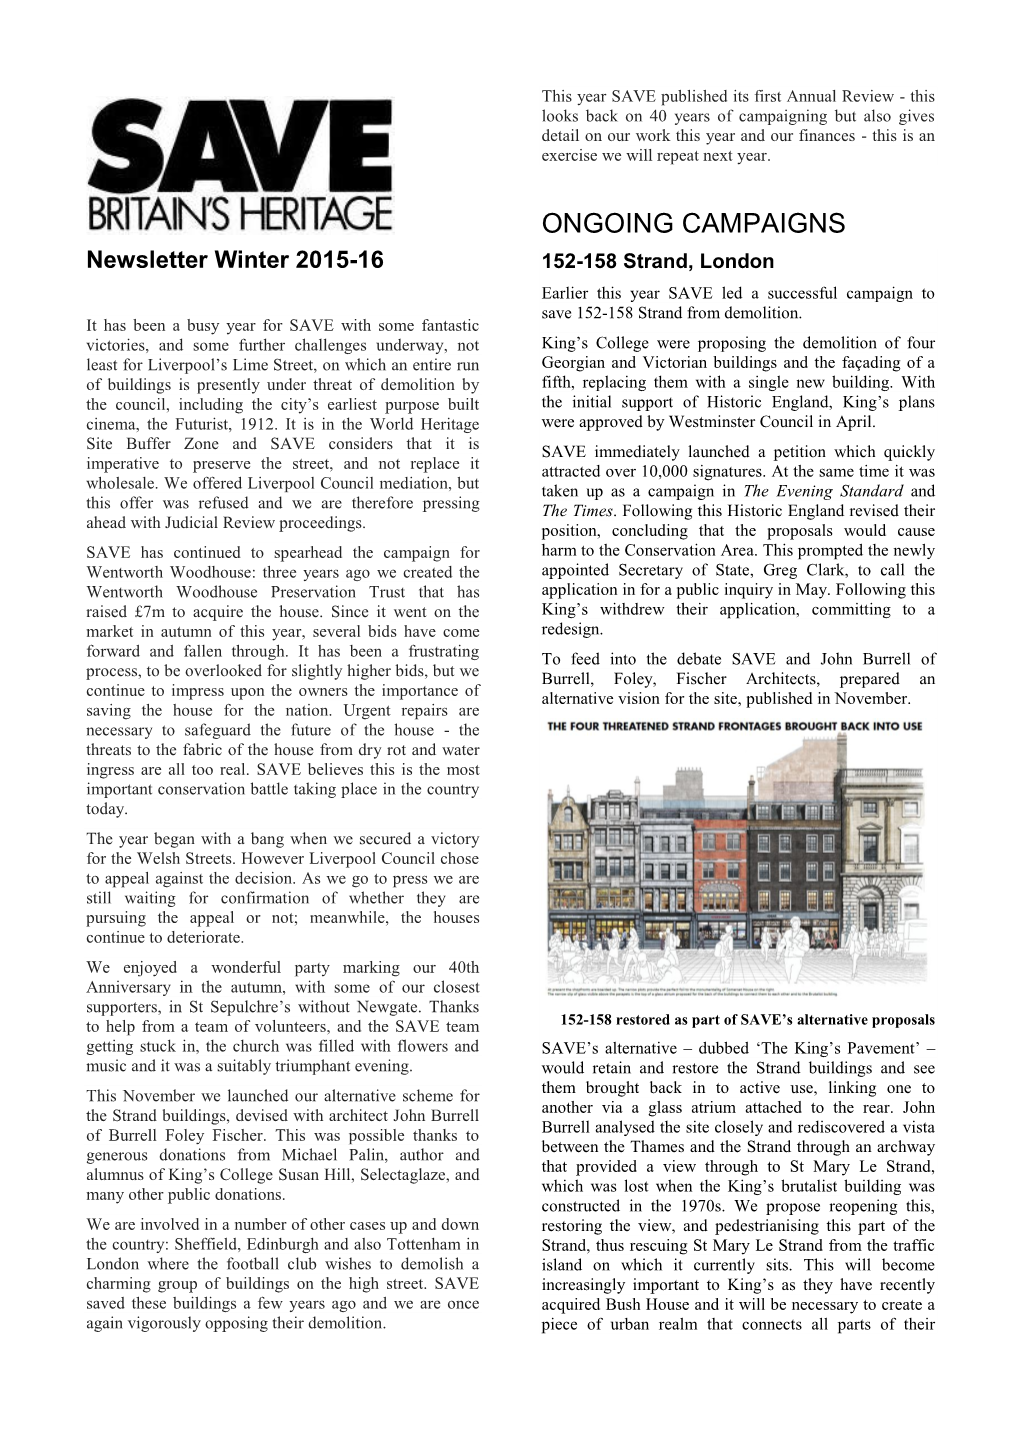 ONGOING CAMPAIGNS Newsletter Winter 2015-16 152-158 Strand, London Earlier This Year SAVE Led a Successful Campaign to Save 152-158 Strand from Demolition